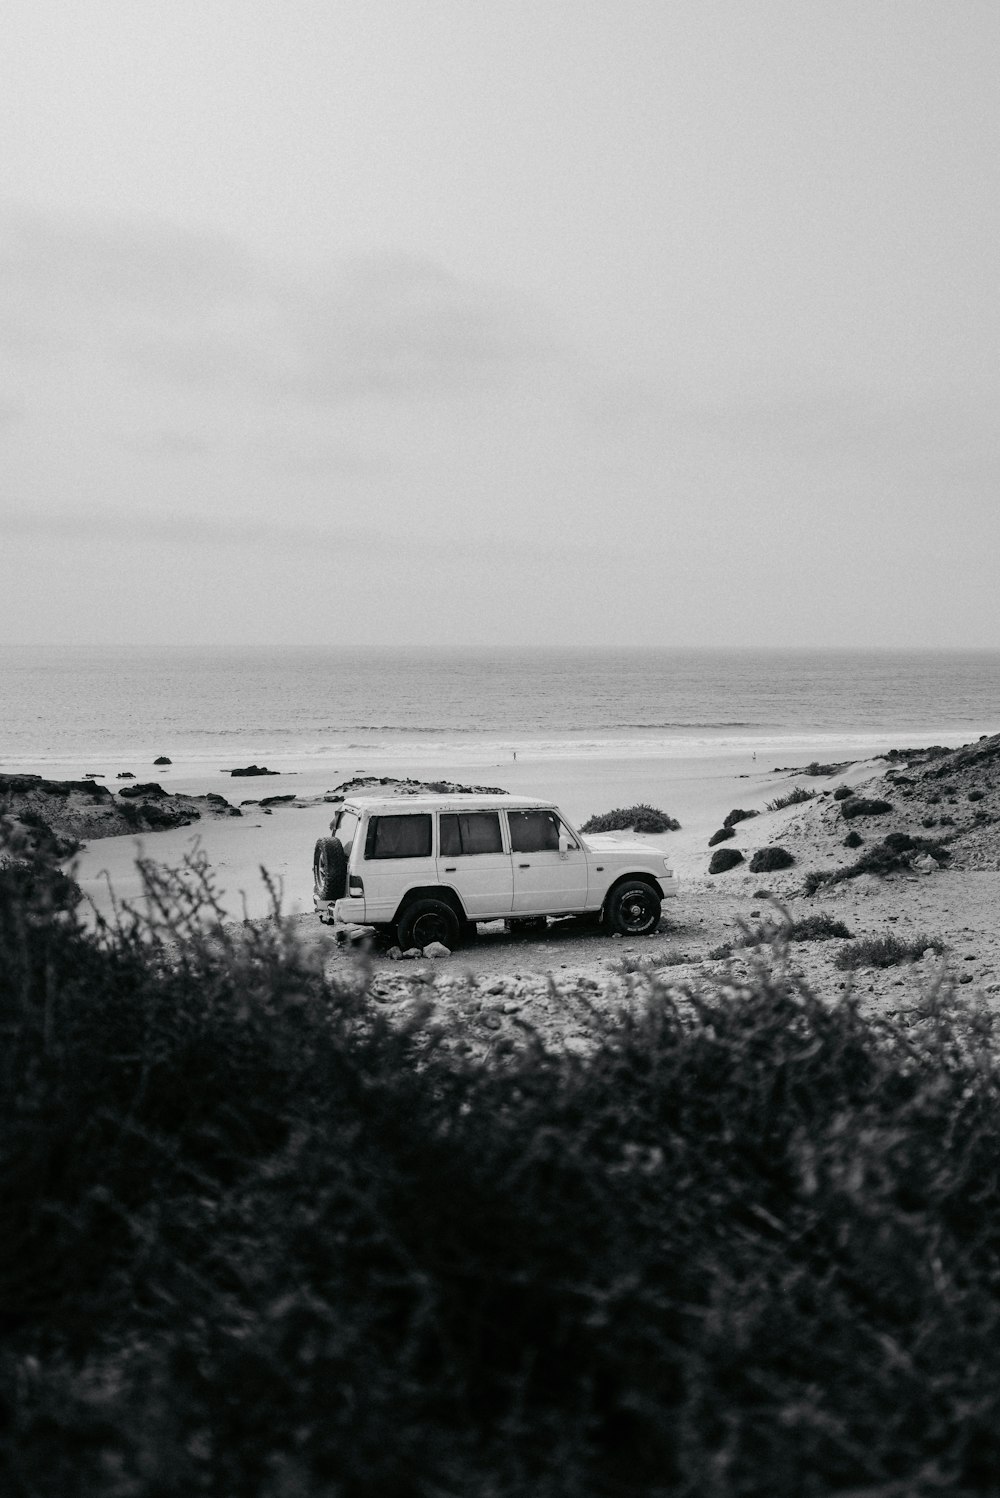 a van is parked on the beach near the water